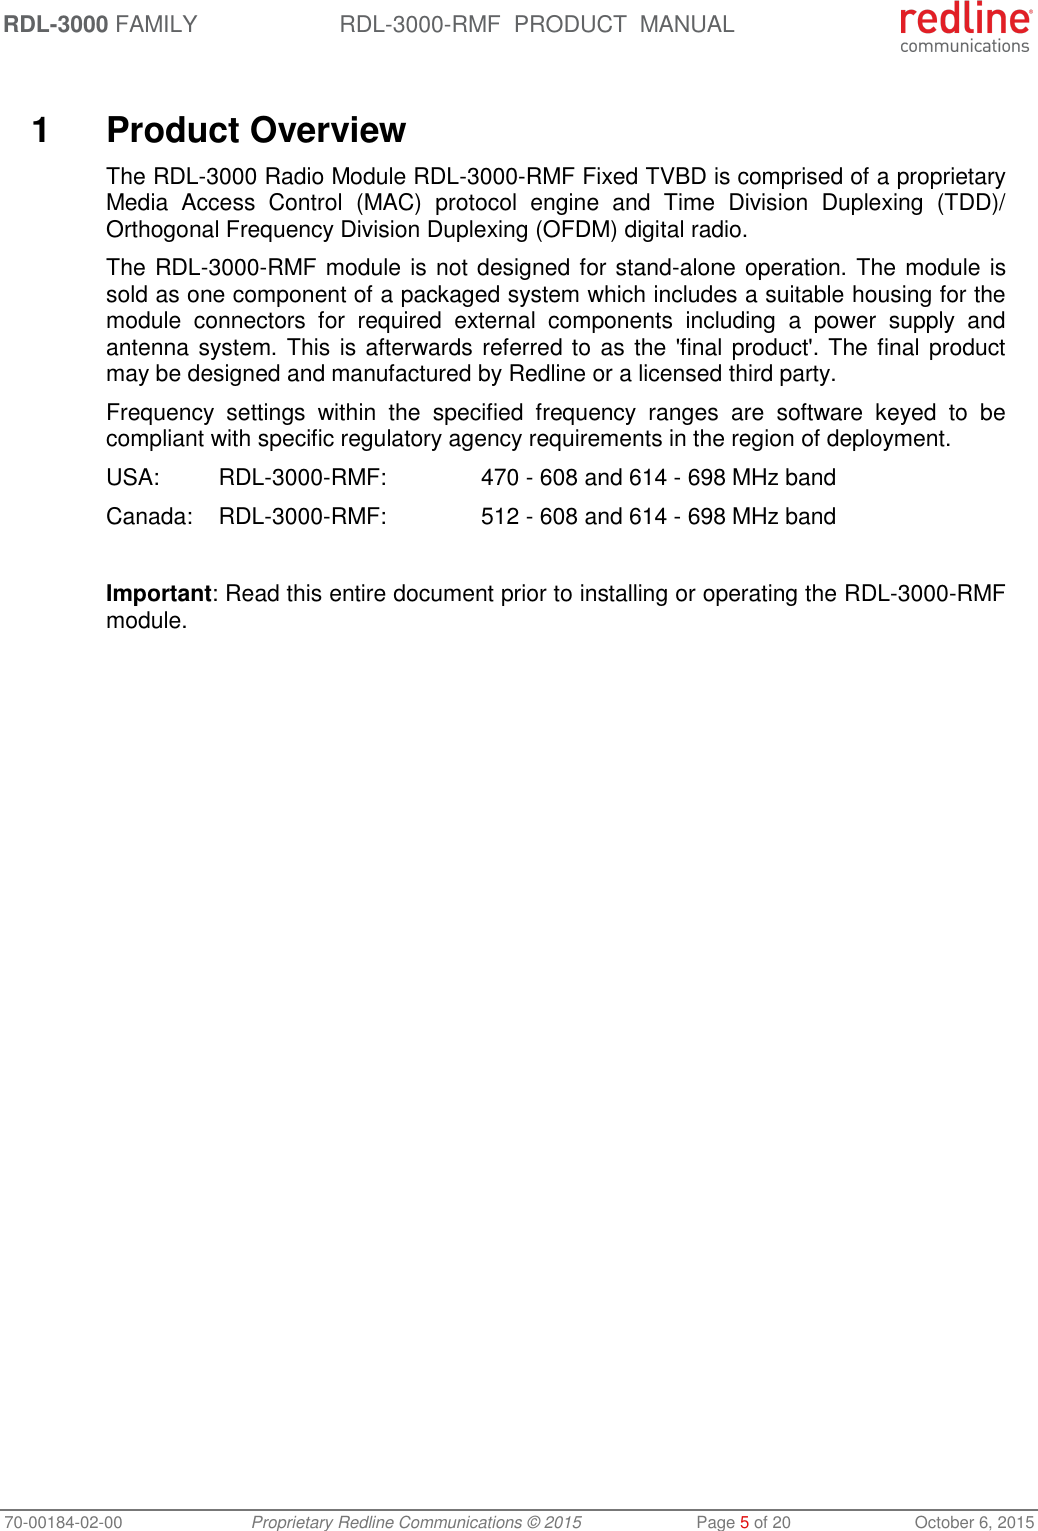 RDL-3000 FAMILY RDL-3000-RMF  PRODUCT  MANUAL 70-00184-02-00 Proprietary Redline Communications © 2015  Page 5 of 20  October 6, 2015   1  Product Overview The RDL-3000 Radio Module RDL-3000-RMF Fixed TVBD is comprised of a proprietary Media  Access  Control  (MAC)  protocol  engine  and  Time  Division  Duplexing  (TDD)/ Orthogonal Frequency Division Duplexing (OFDM) digital radio. The RDL-3000-RMF module is not designed for stand-alone operation. The module is sold as one component of a packaged system which includes a suitable housing for the module  connectors  for  required  external  components  including  a  power  supply  and antenna system. This is afterwards referred to as the &apos;final product&apos;. The final product may be designed and manufactured by Redline or a licensed third party. Frequency  settings  within  the  specified  frequency  ranges  are  software  keyed  to  be compliant with specific regulatory agency requirements in the region of deployment. USA: RDL-3000-RMF:    470 - 608 and 614 - 698 MHz band Canada:  RDL-3000-RMF:    512 - 608 and 614 - 698 MHz band  Important: Read this entire document prior to installing or operating the RDL-3000-RMF module.  